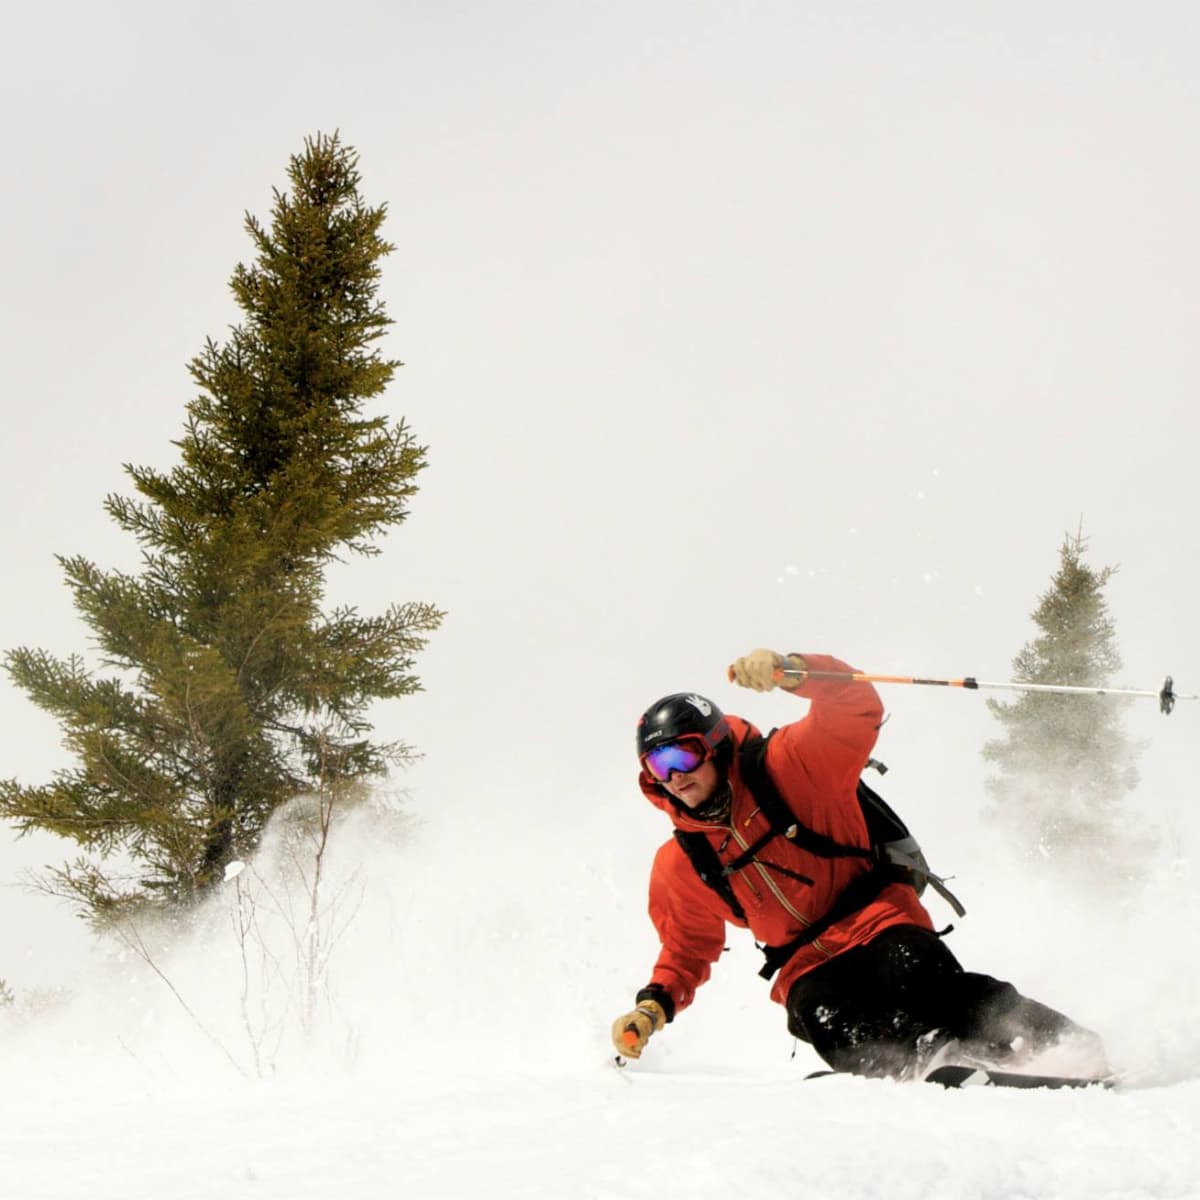 Hot Chic' and Other Words on Skiing the Gaspé Peninsula - Powder